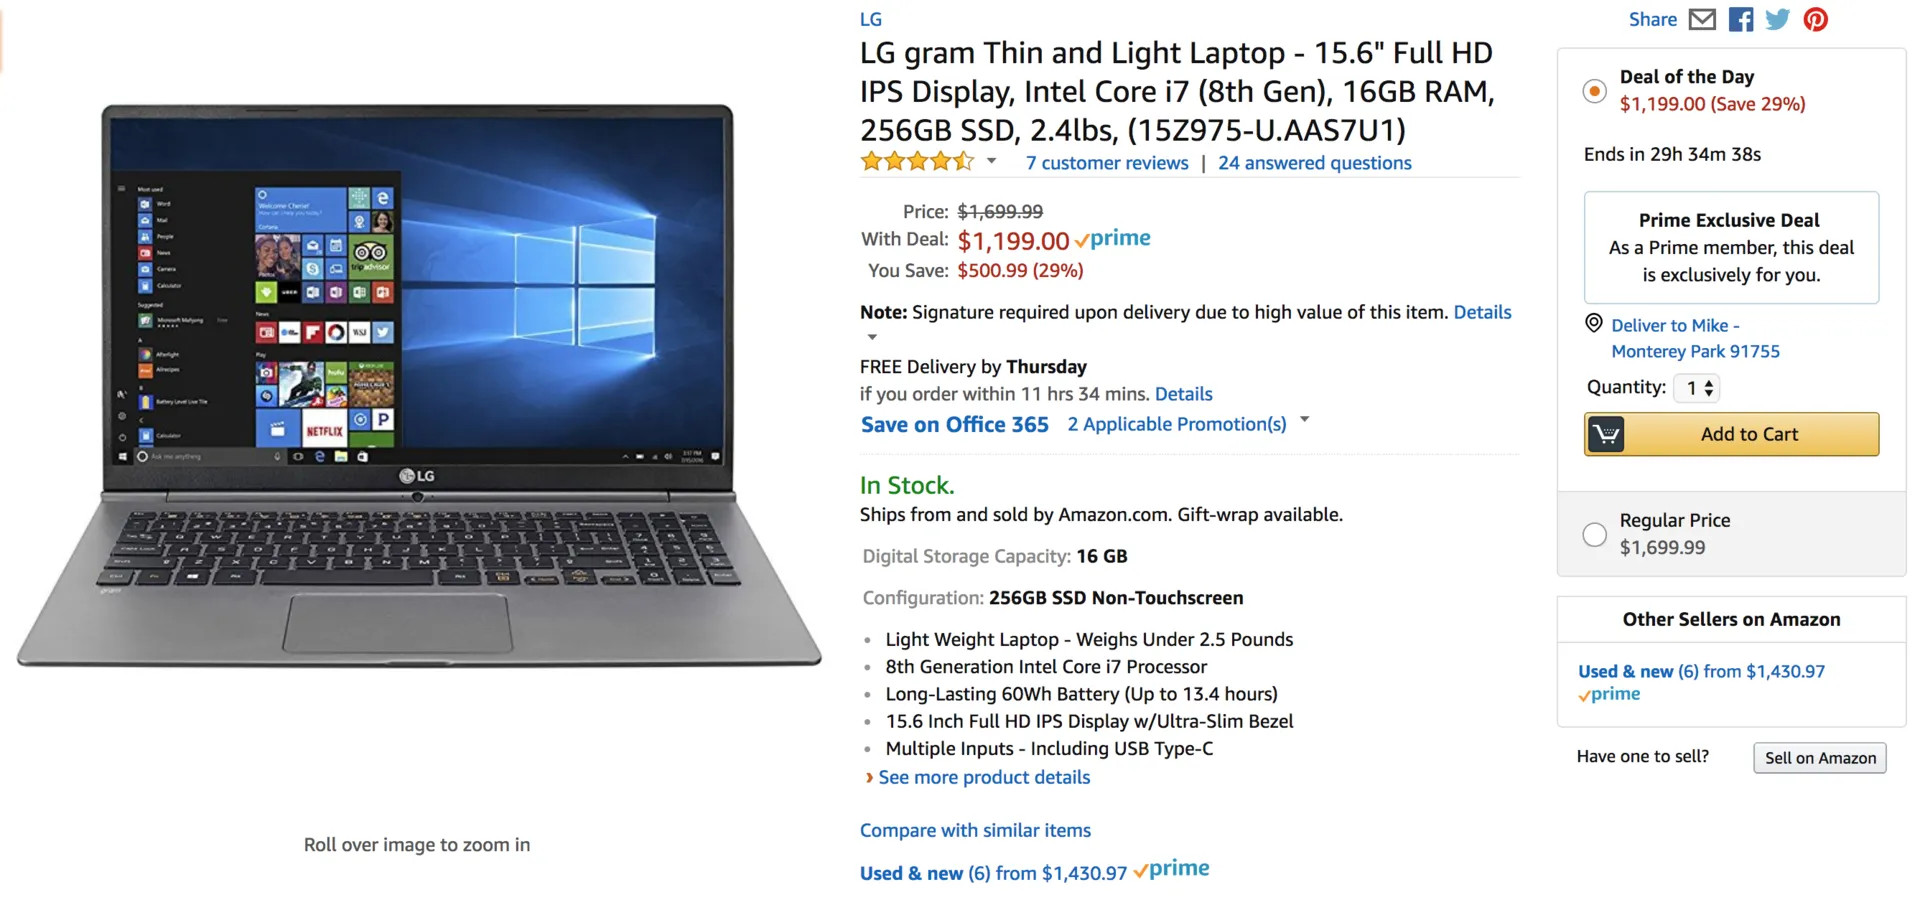 LG Gram Ultra Light Notebook is $500 off for Prime Day